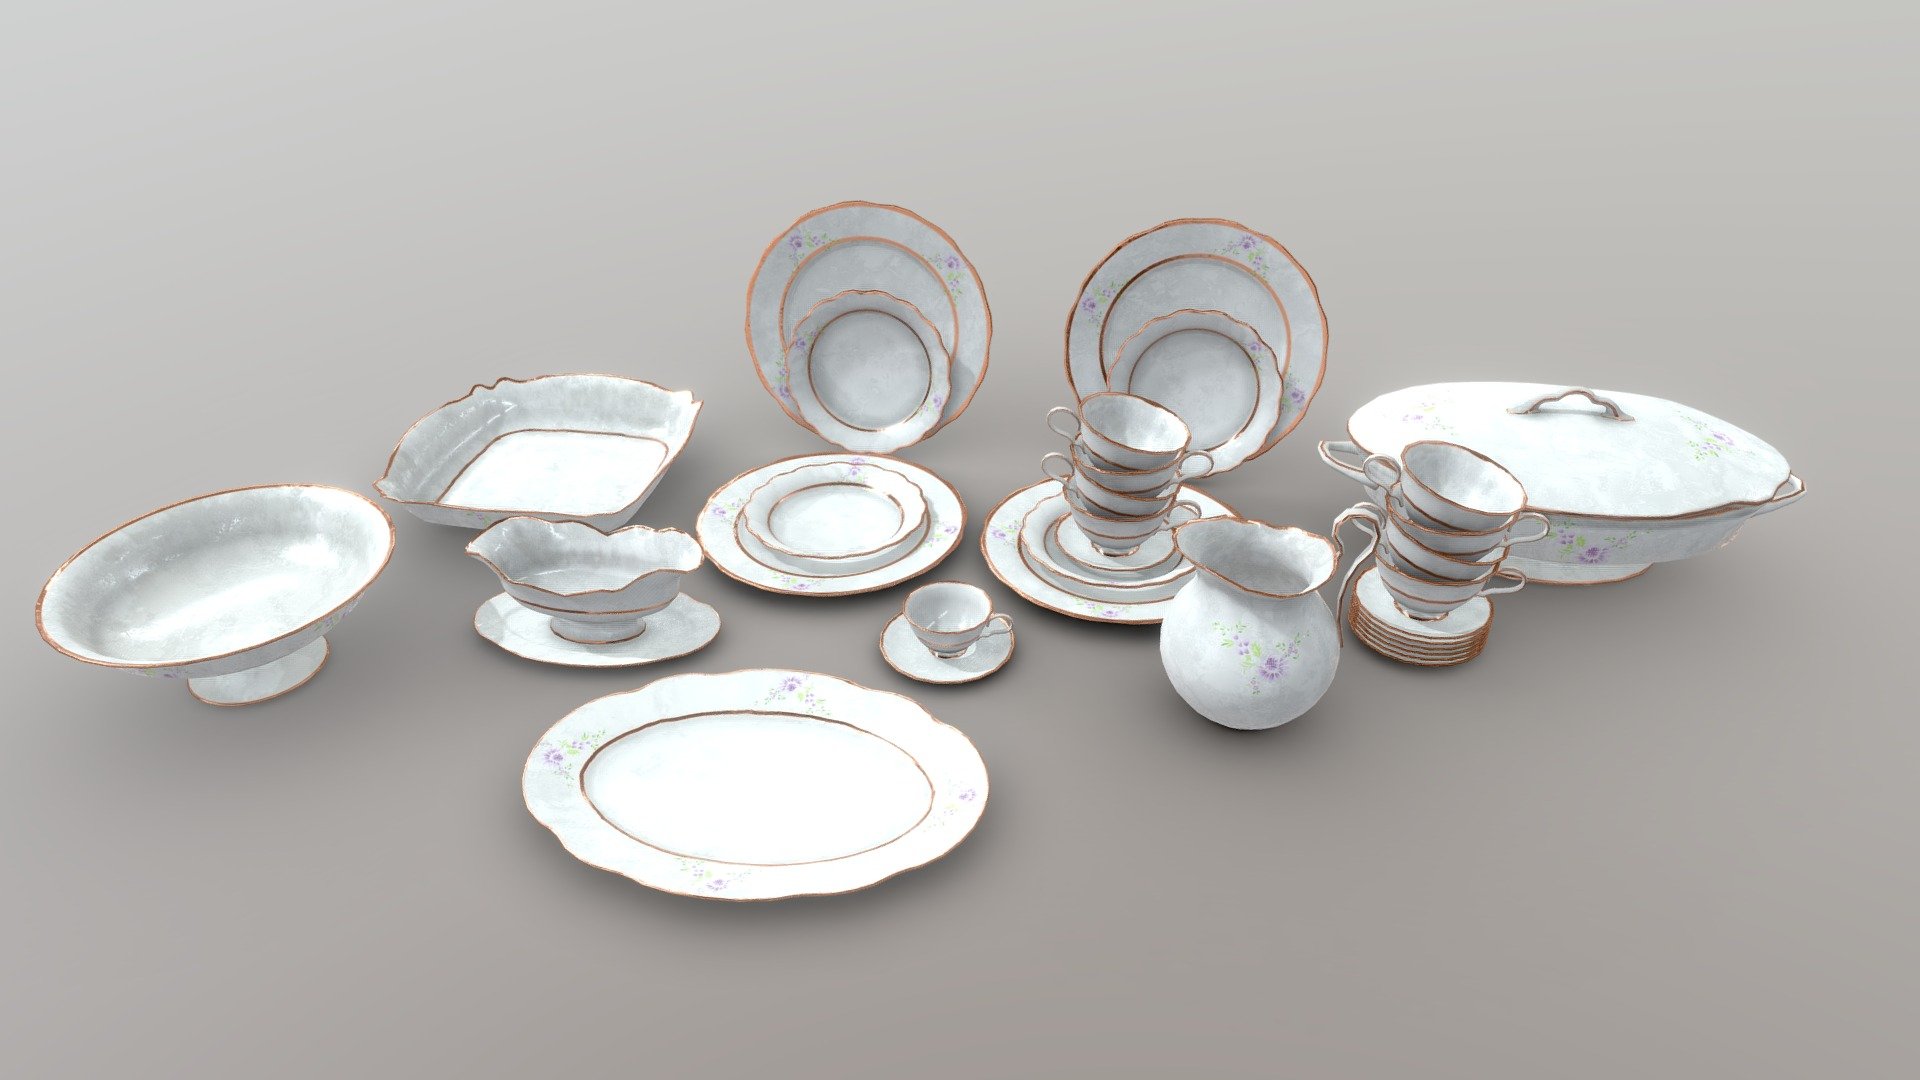 Personal work (3dsMax, Substance Painter, Photoshop)

These models are part of current Blockchain Game in development: Goldfever

Gold Fever - Have fun and earn with our gold rush simulation &hellip;
https://goldfever.io - Tableware - 3D model by Xorxe 3d model